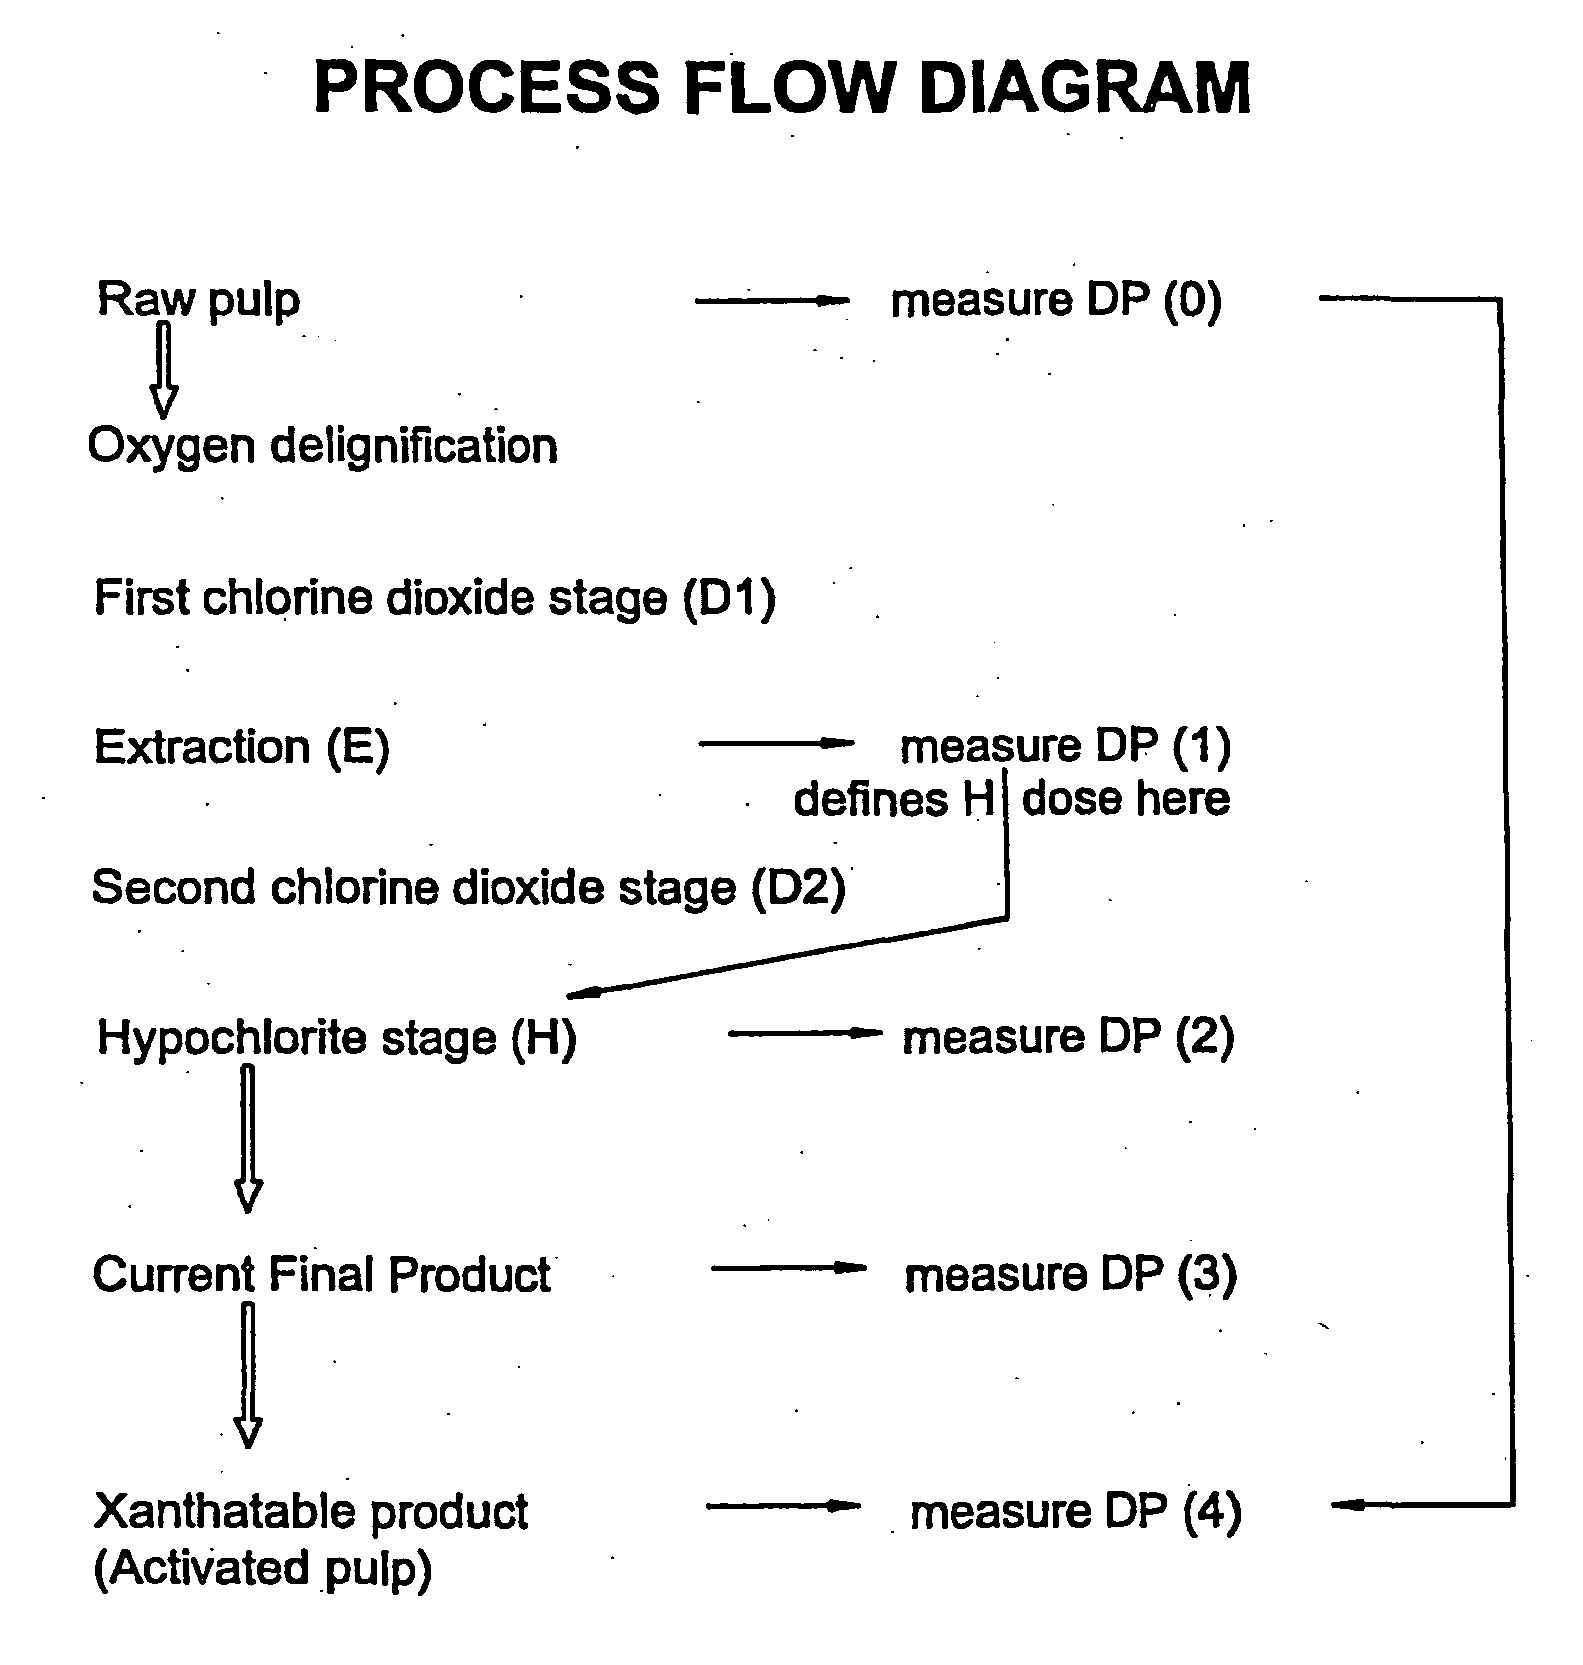 Pulp treatment and process